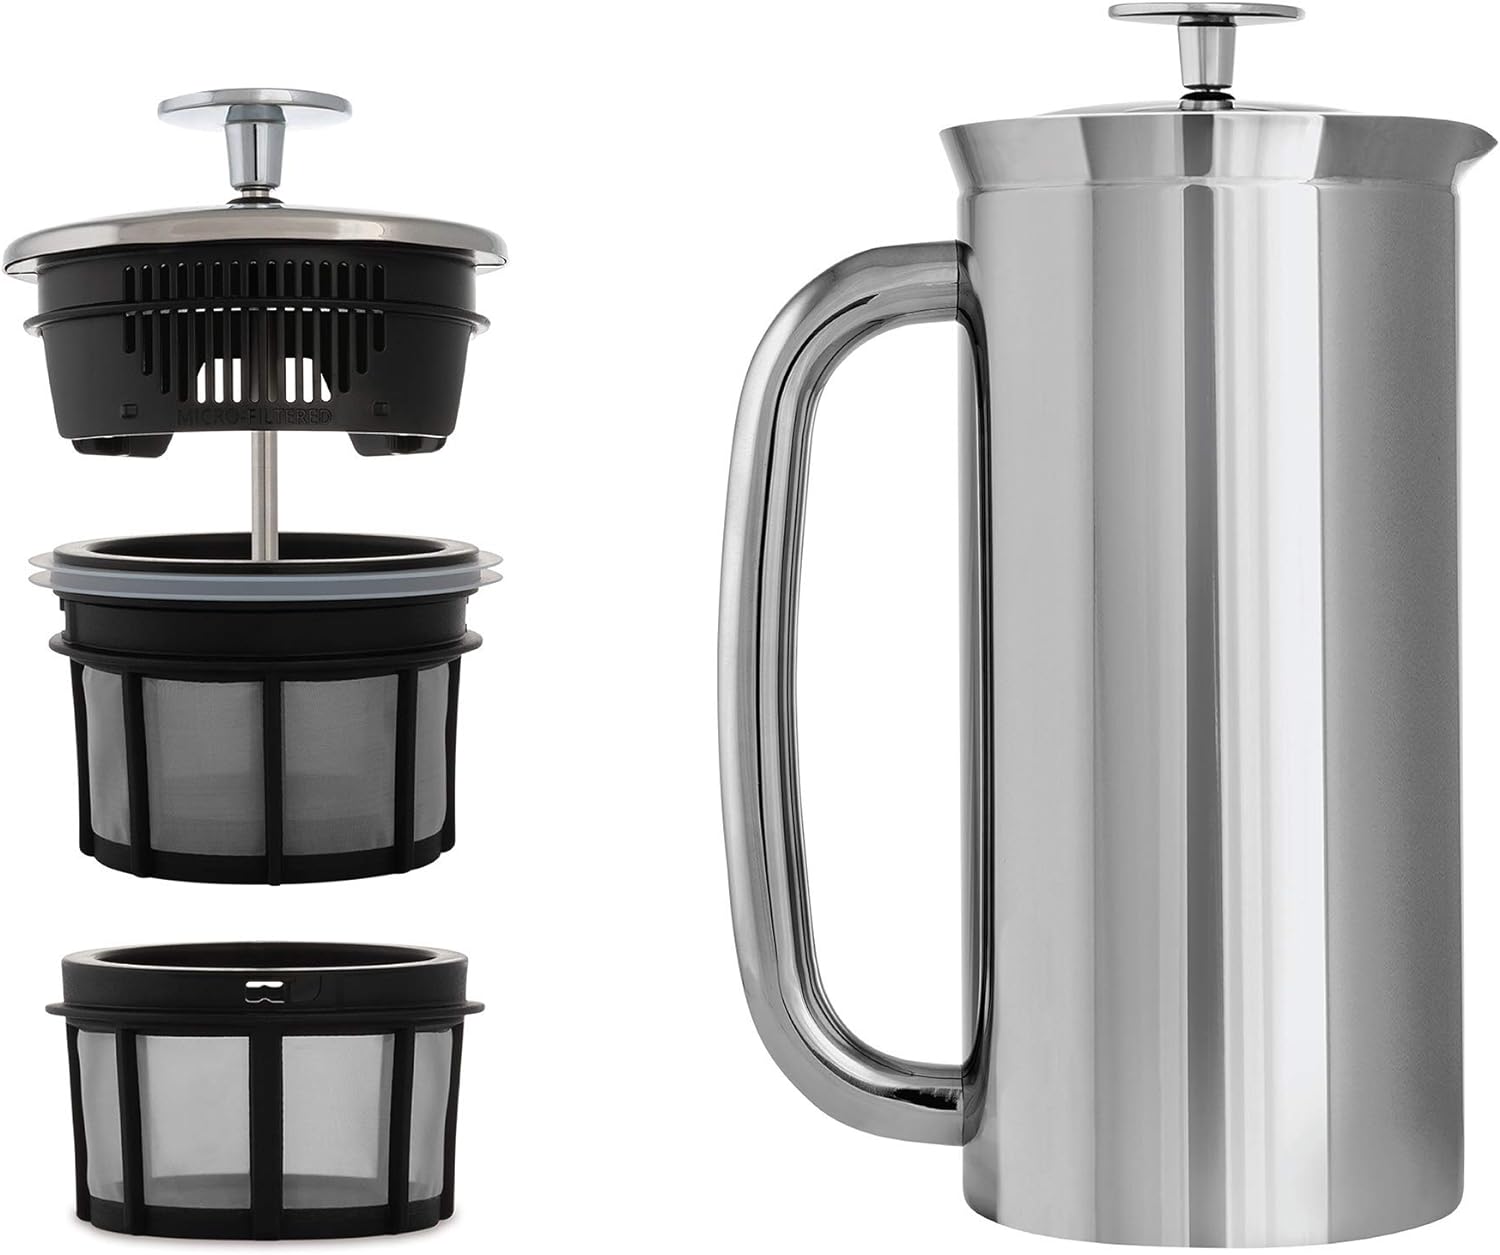 French Press Is Espro P7